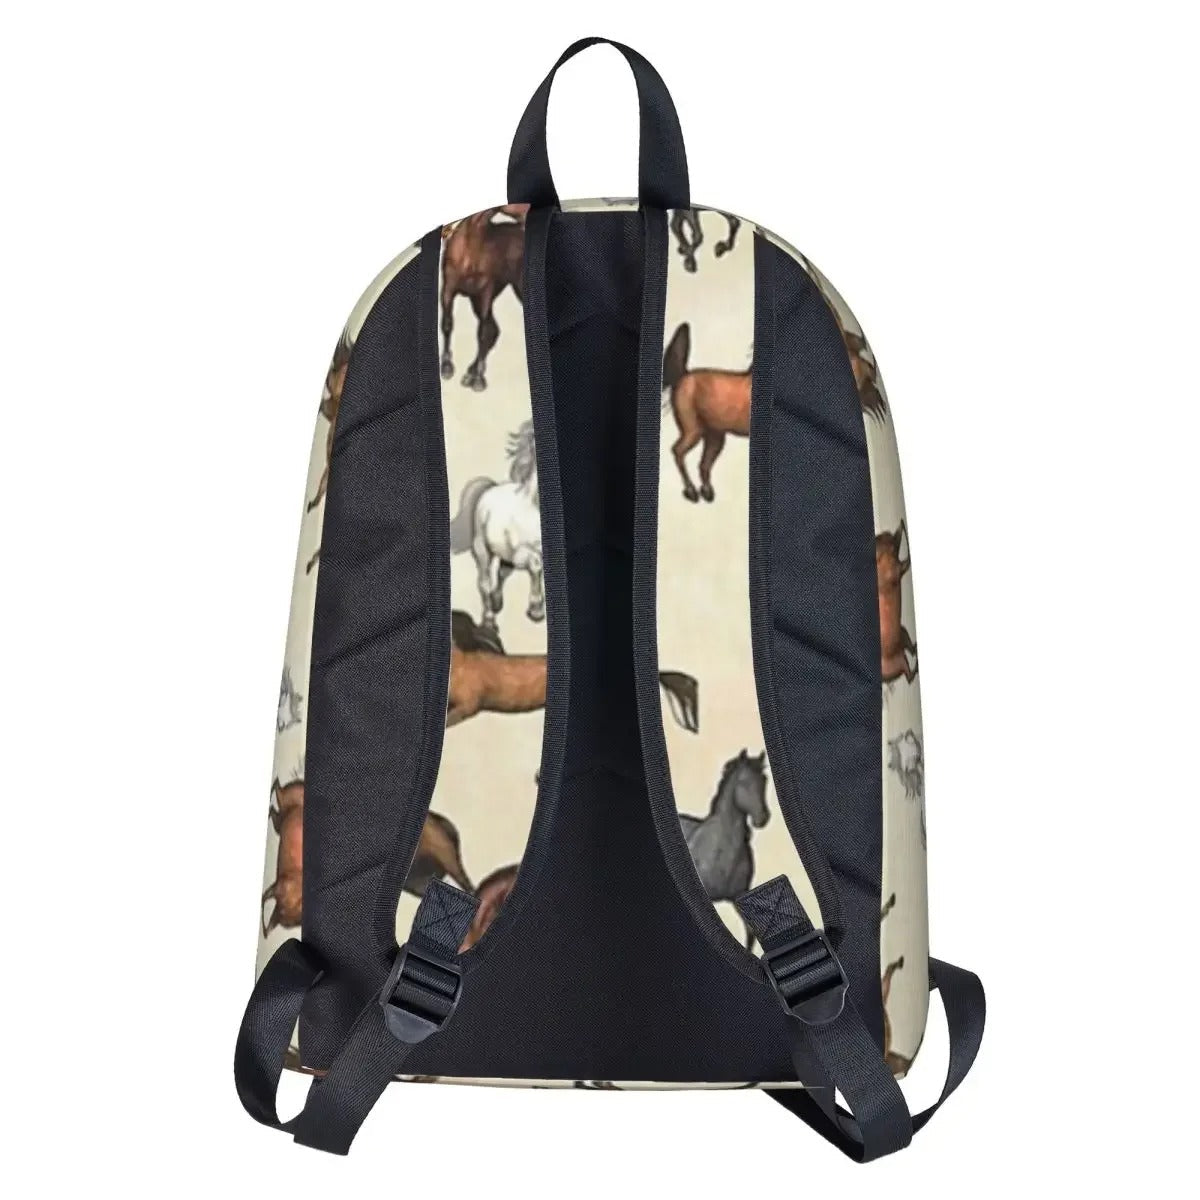 Backpack with Horse Design